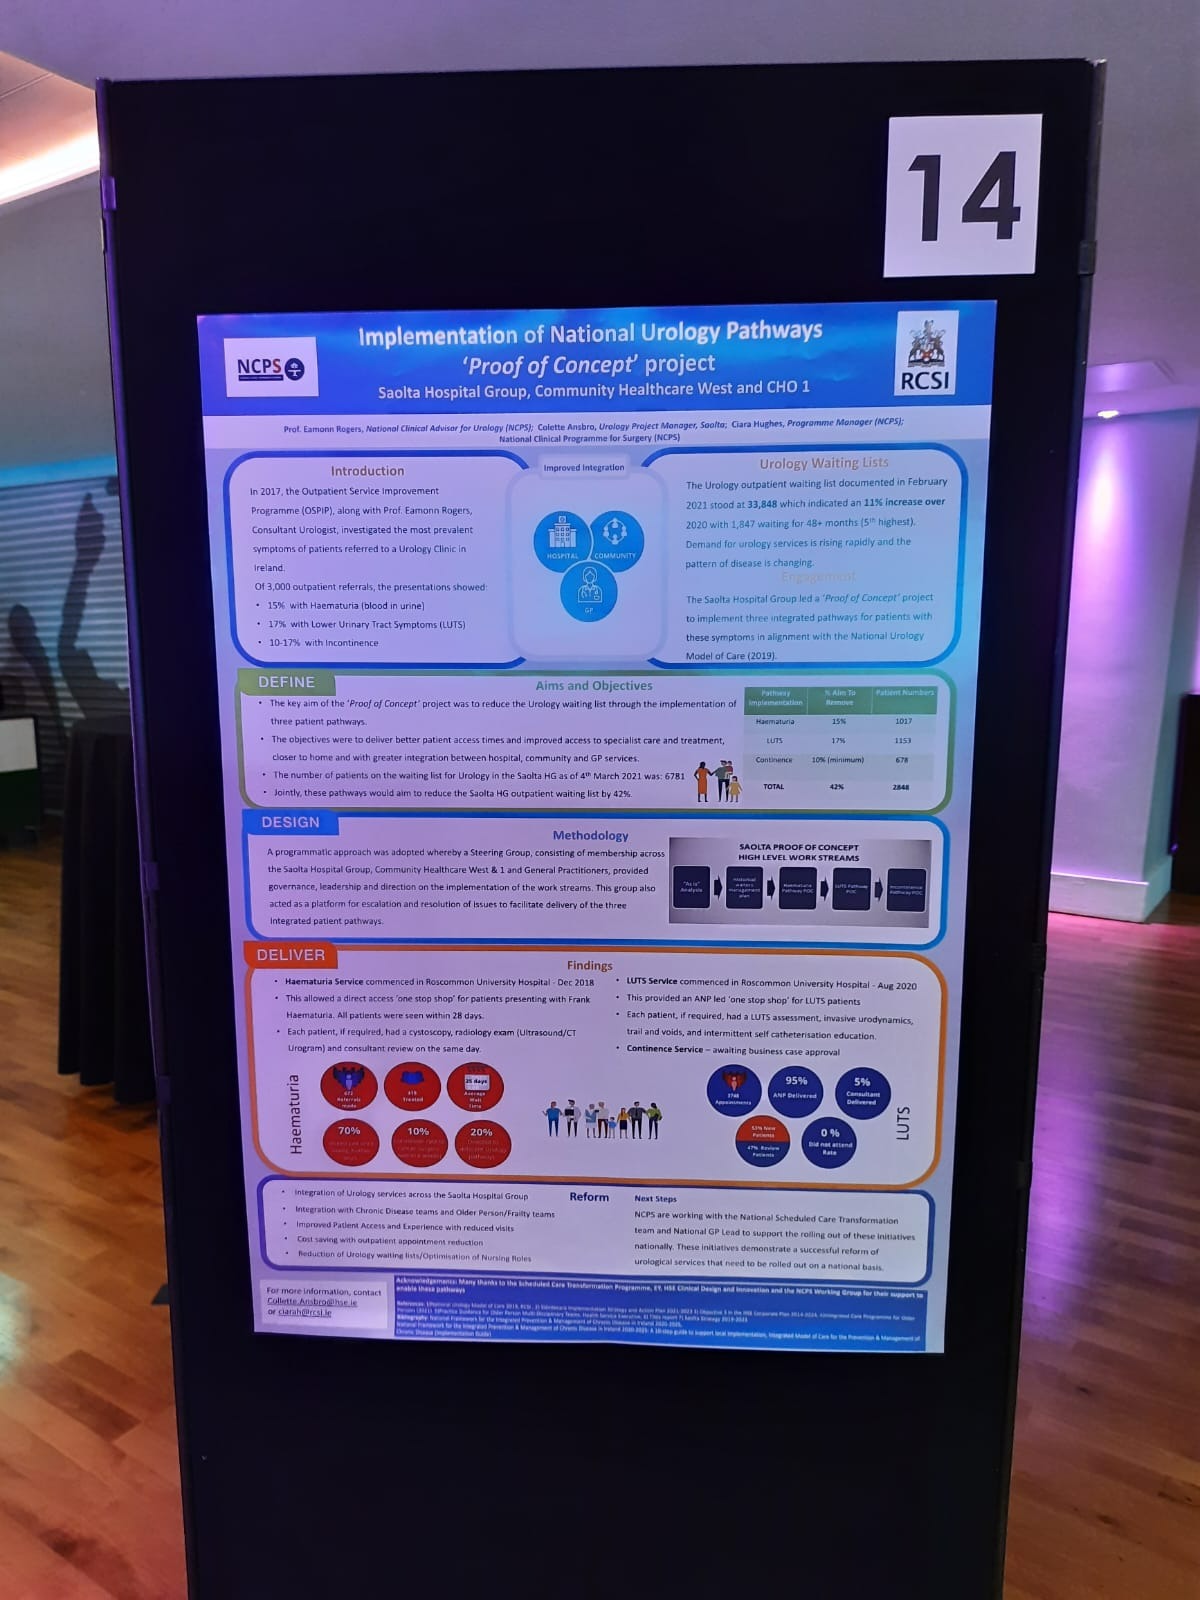 ‘Implementation of National Urology Pathways Proof of Concept Project’ poster submitted to the NCP conference in October 2022